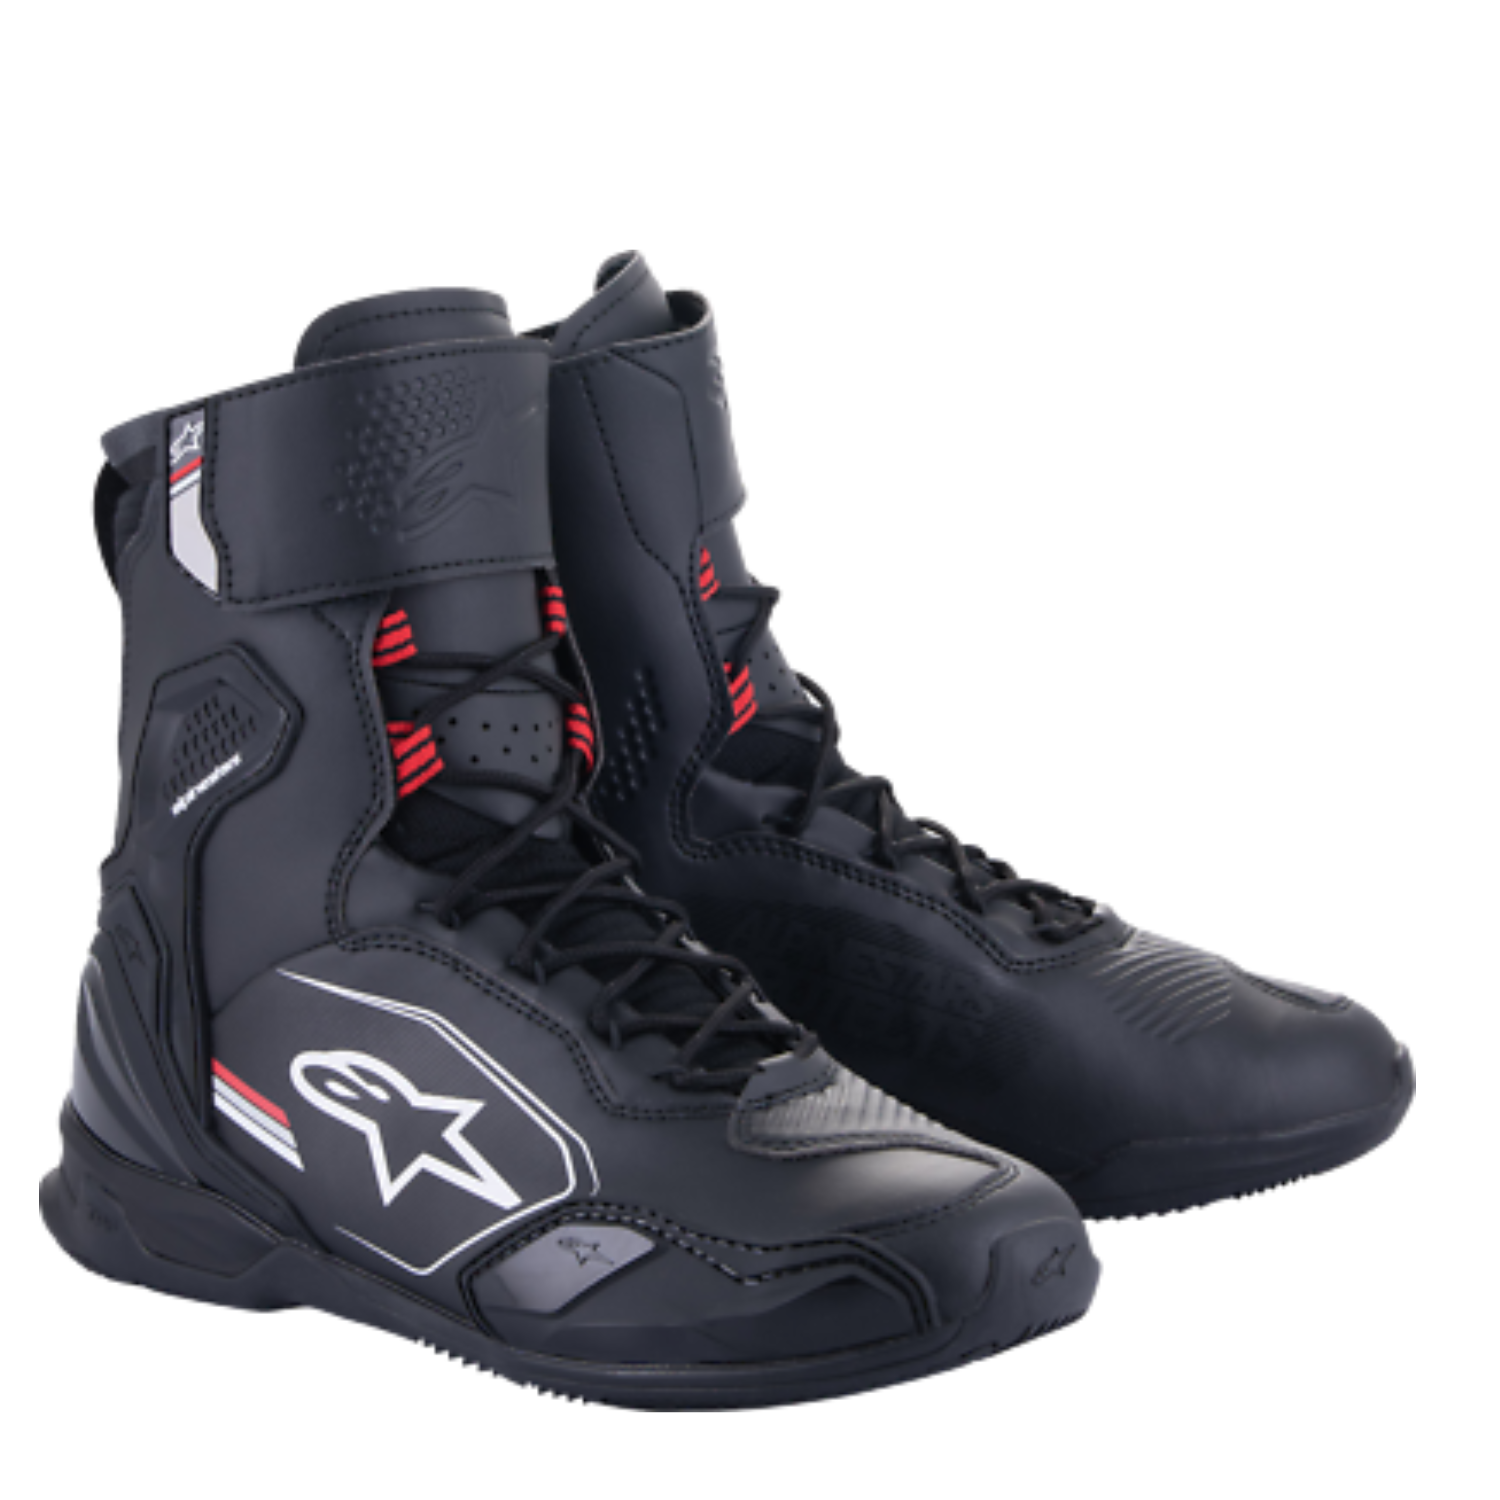 Image of Alpinestars Superfaster Shoes Black Gray Bright Red Size US 95 ID 8059347260808